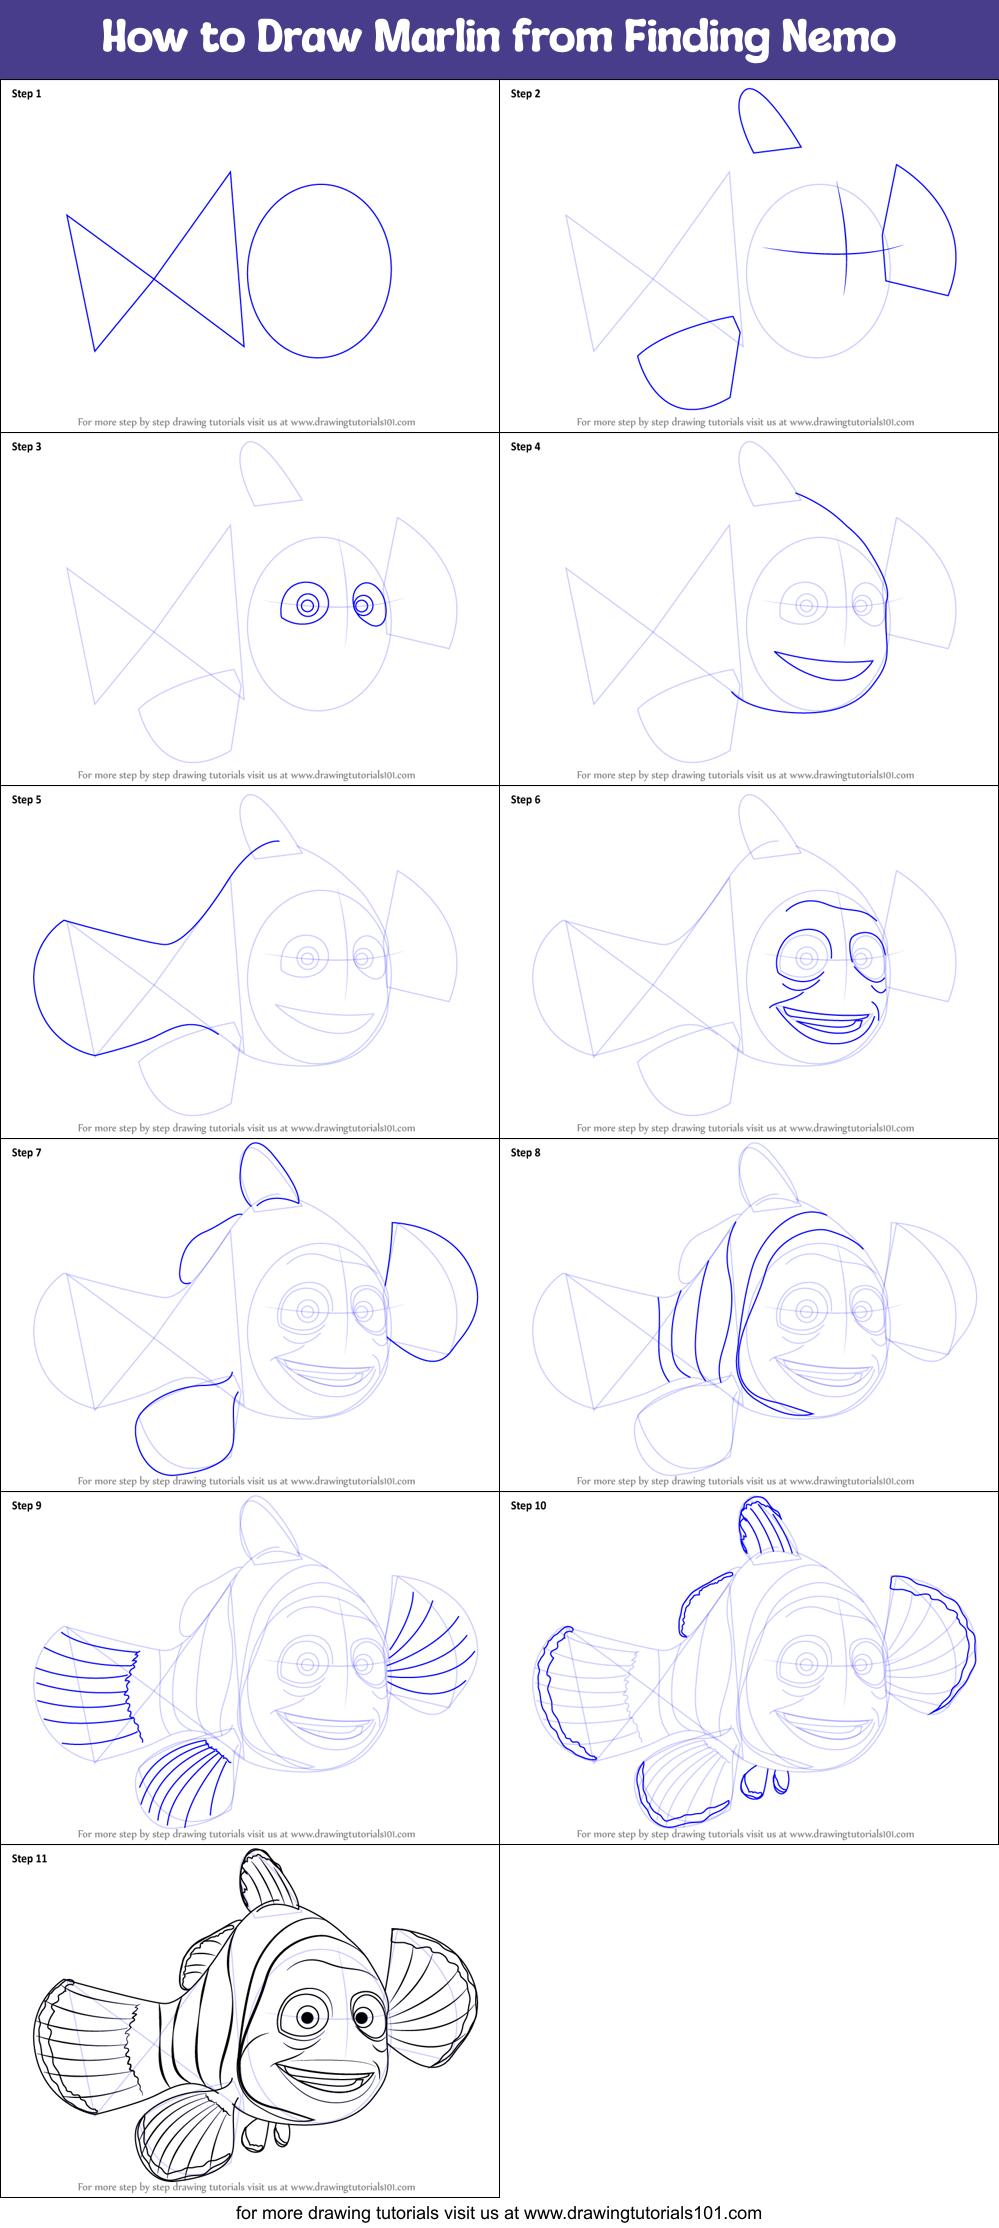 How to Draw Marlin from Finding Nemo printable step by step drawing